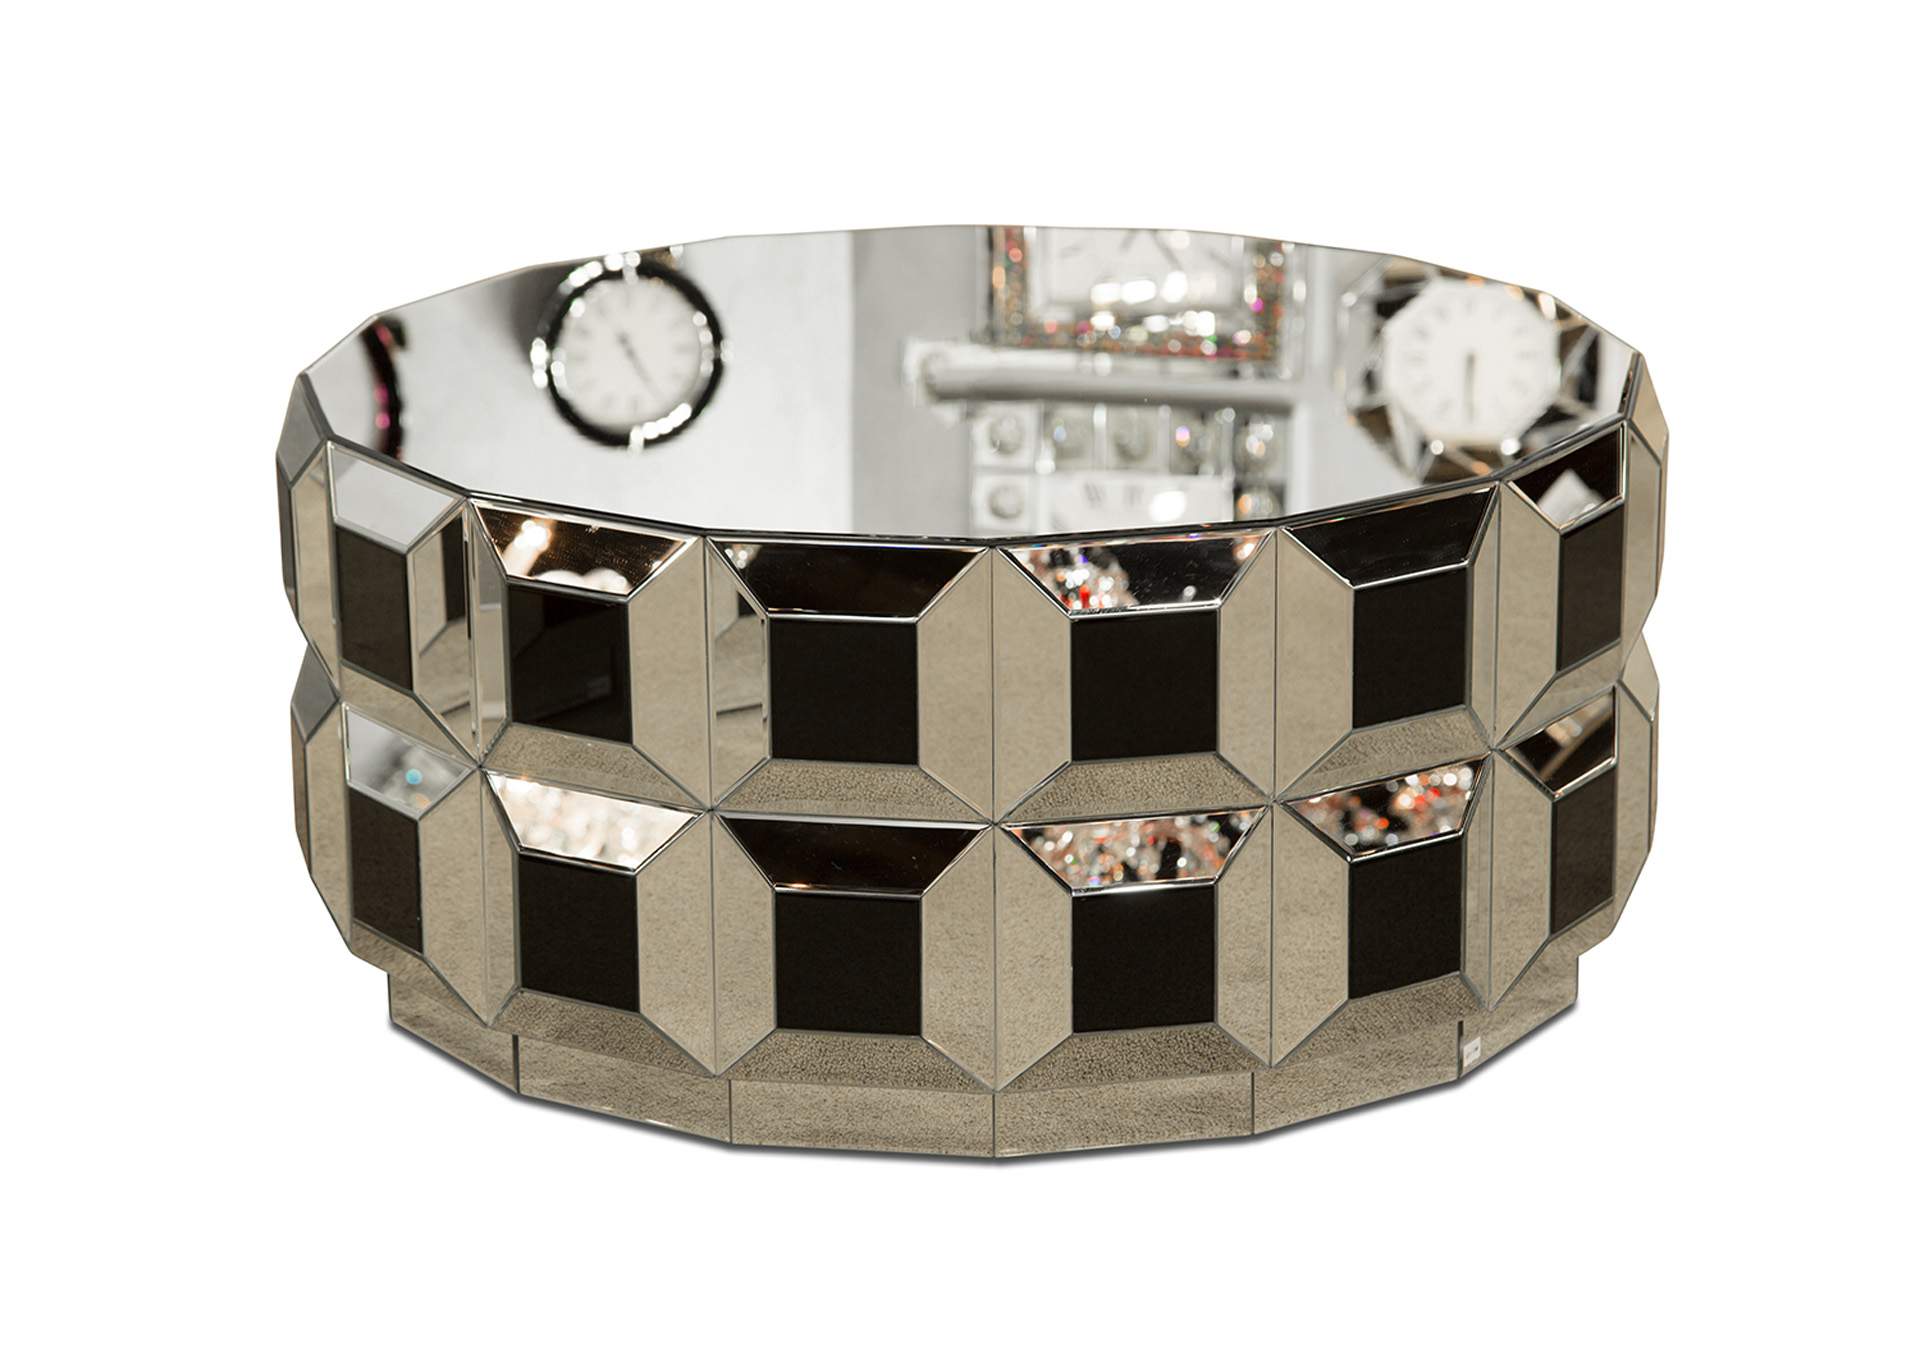 Royal Furniture Gifts Montreal Silver Prism Roundmirrored